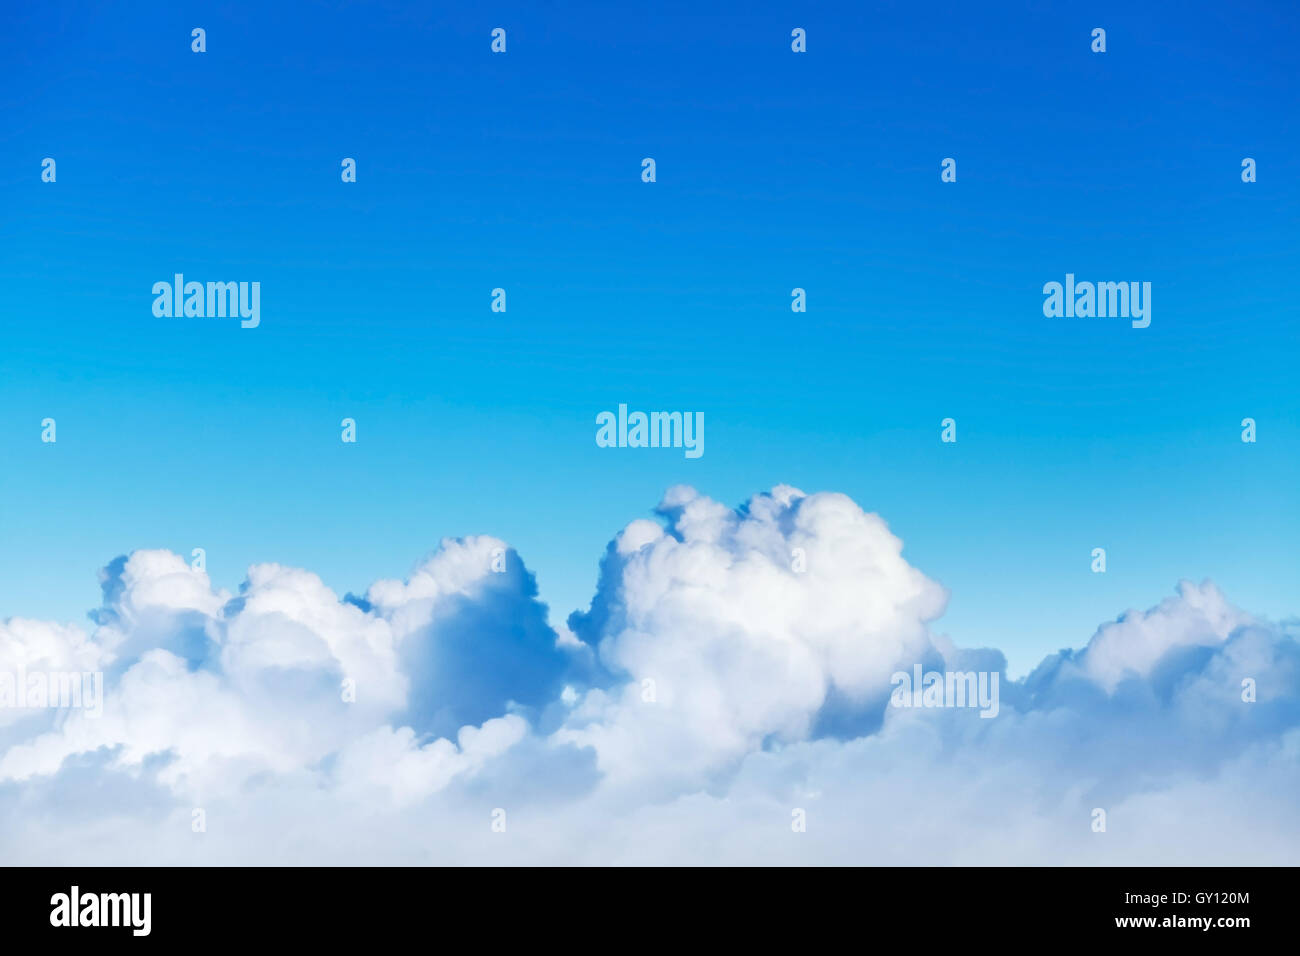 Cloudscape with white cumulus clouds in bright blue sky, natural photo background Stock Photo